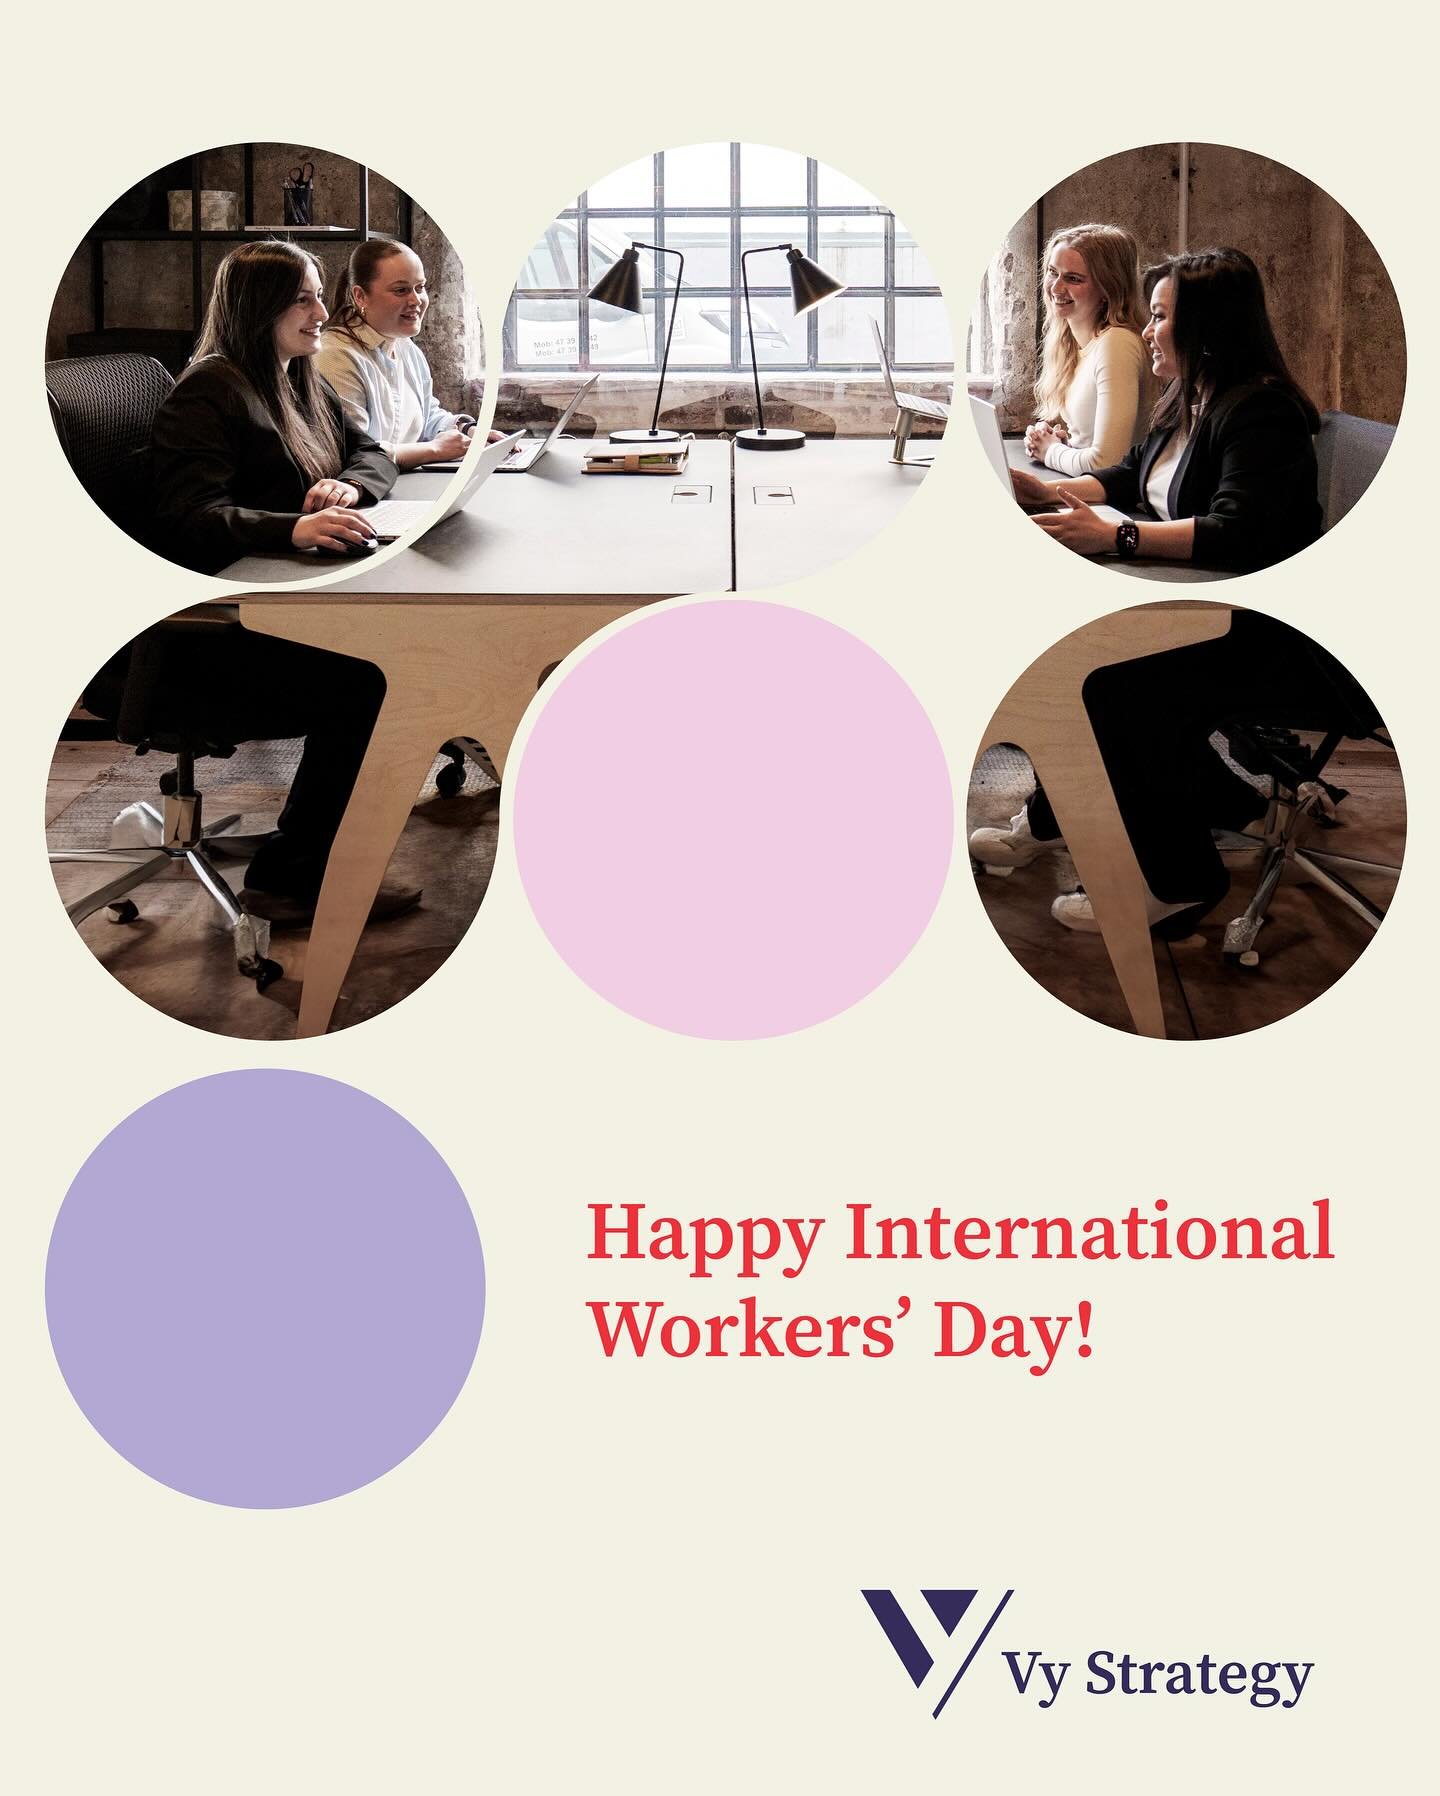 Happy International Workers&rsquo; Day! Gratulerer med arbeidernes dag! 🌎

At Vy Strategy we get to work with people in many different roles, and we are continually inspired by the hard work, dedication, and contributions of workers here in our city